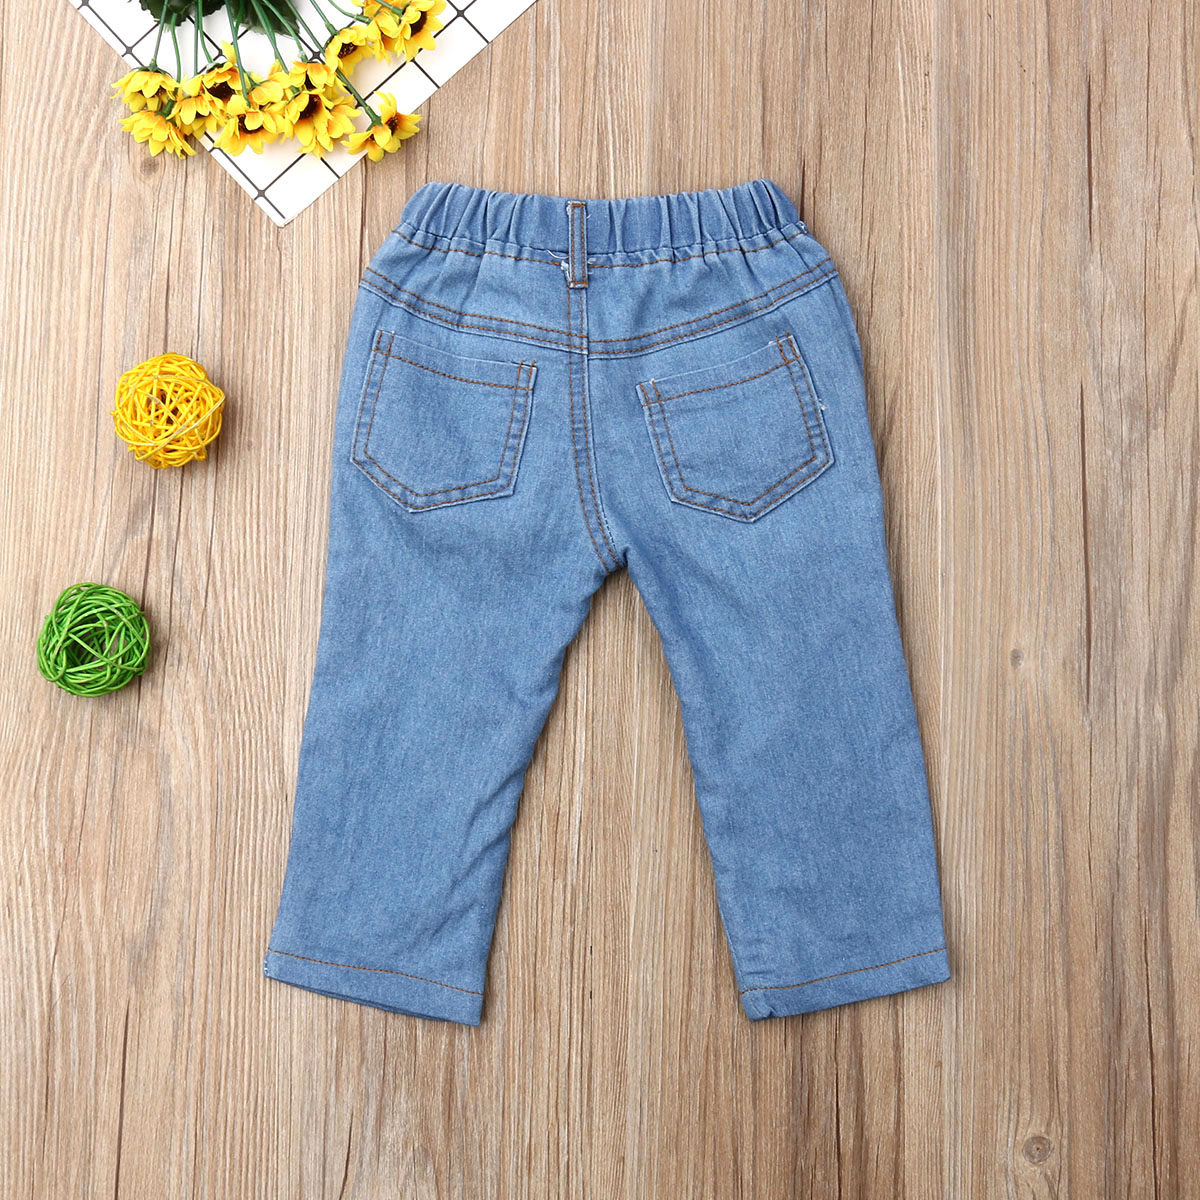 Pudcoco Summer Toddler Baby Girl Clothes Casual Shredded Hole Jeans Denim Pants Elastic Trousers